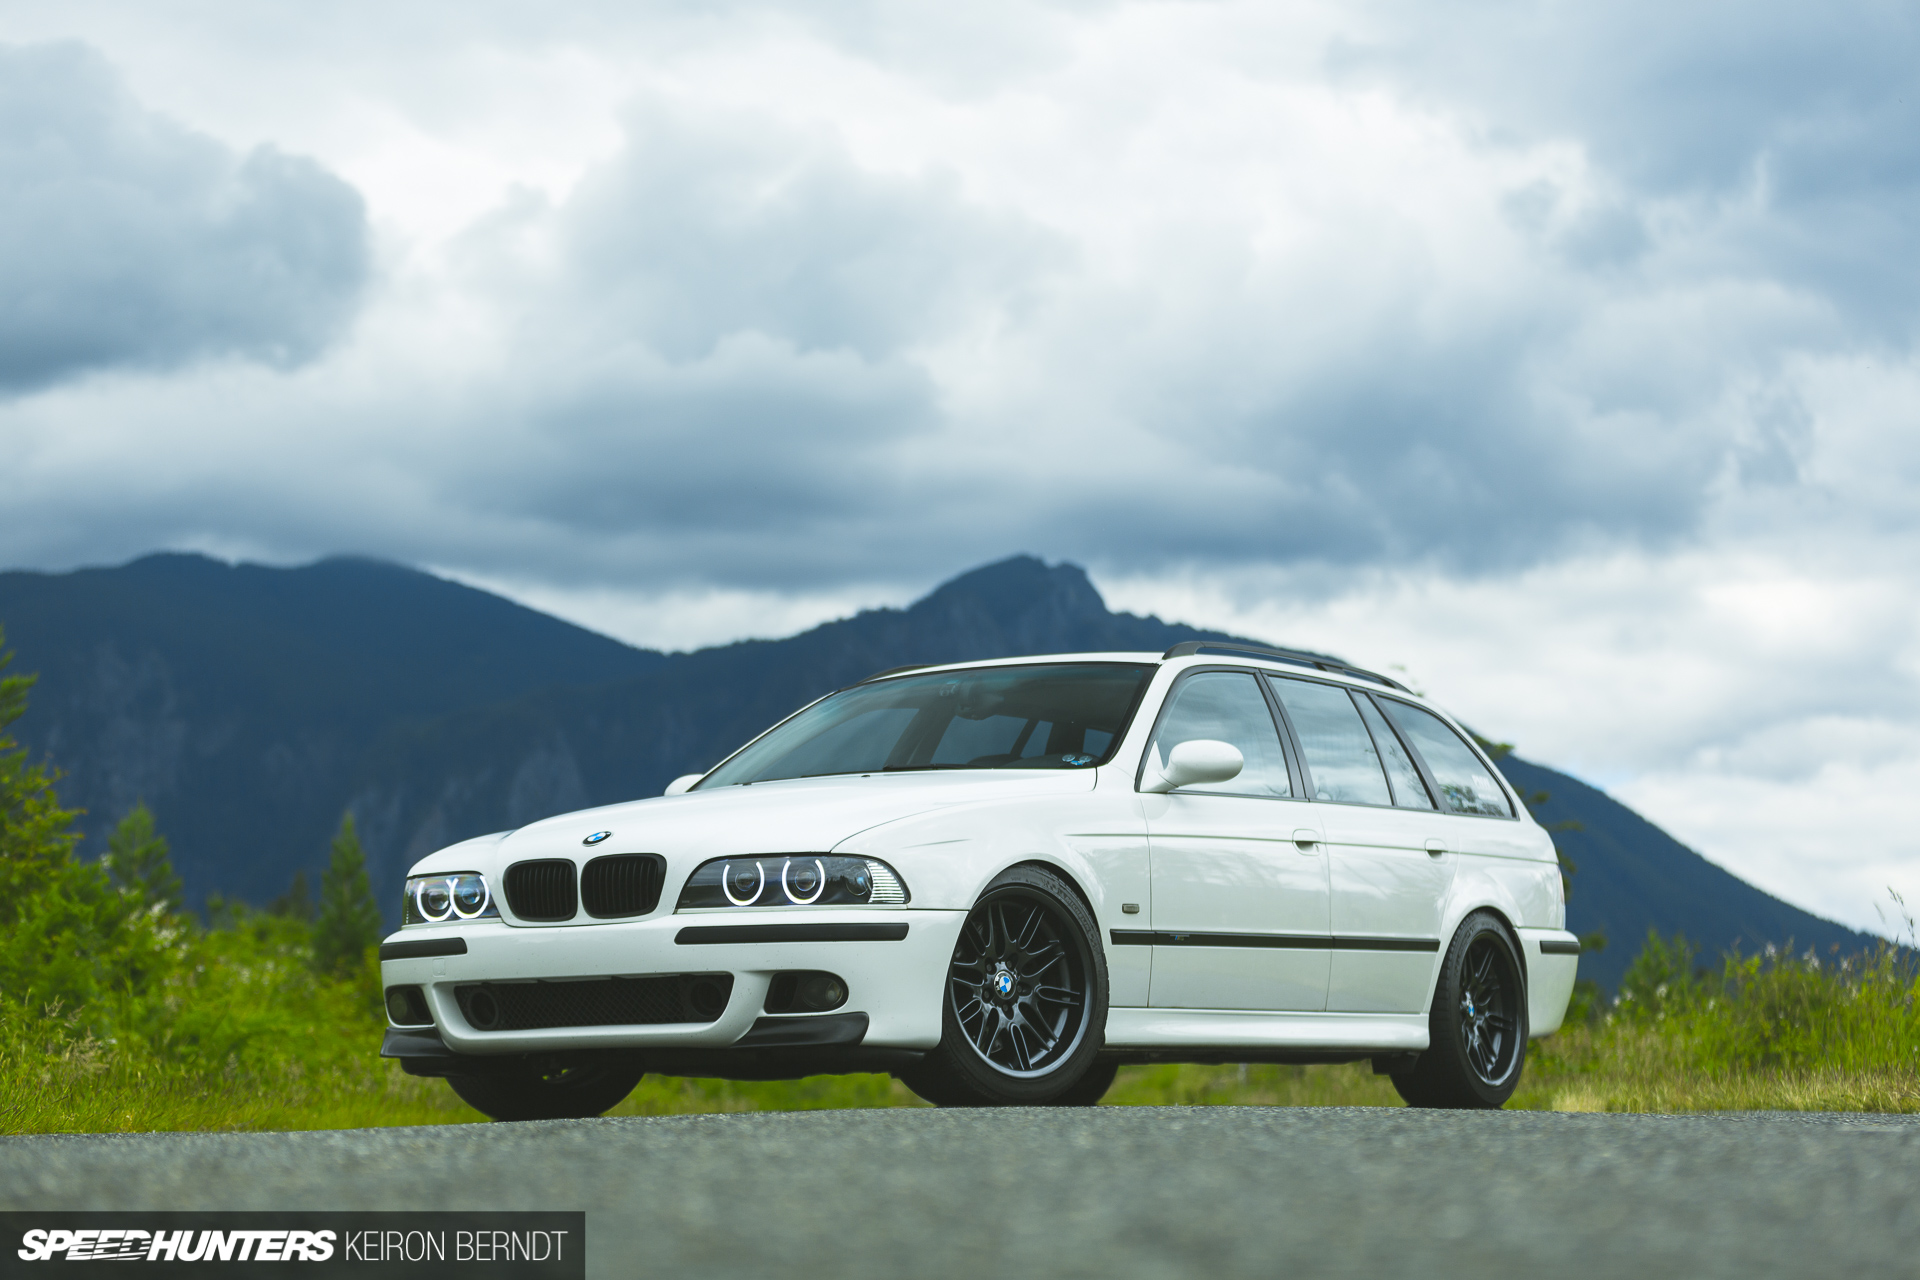 The E39 M5 Touring Which BMW Didn't Get To Keep - Speedhunters